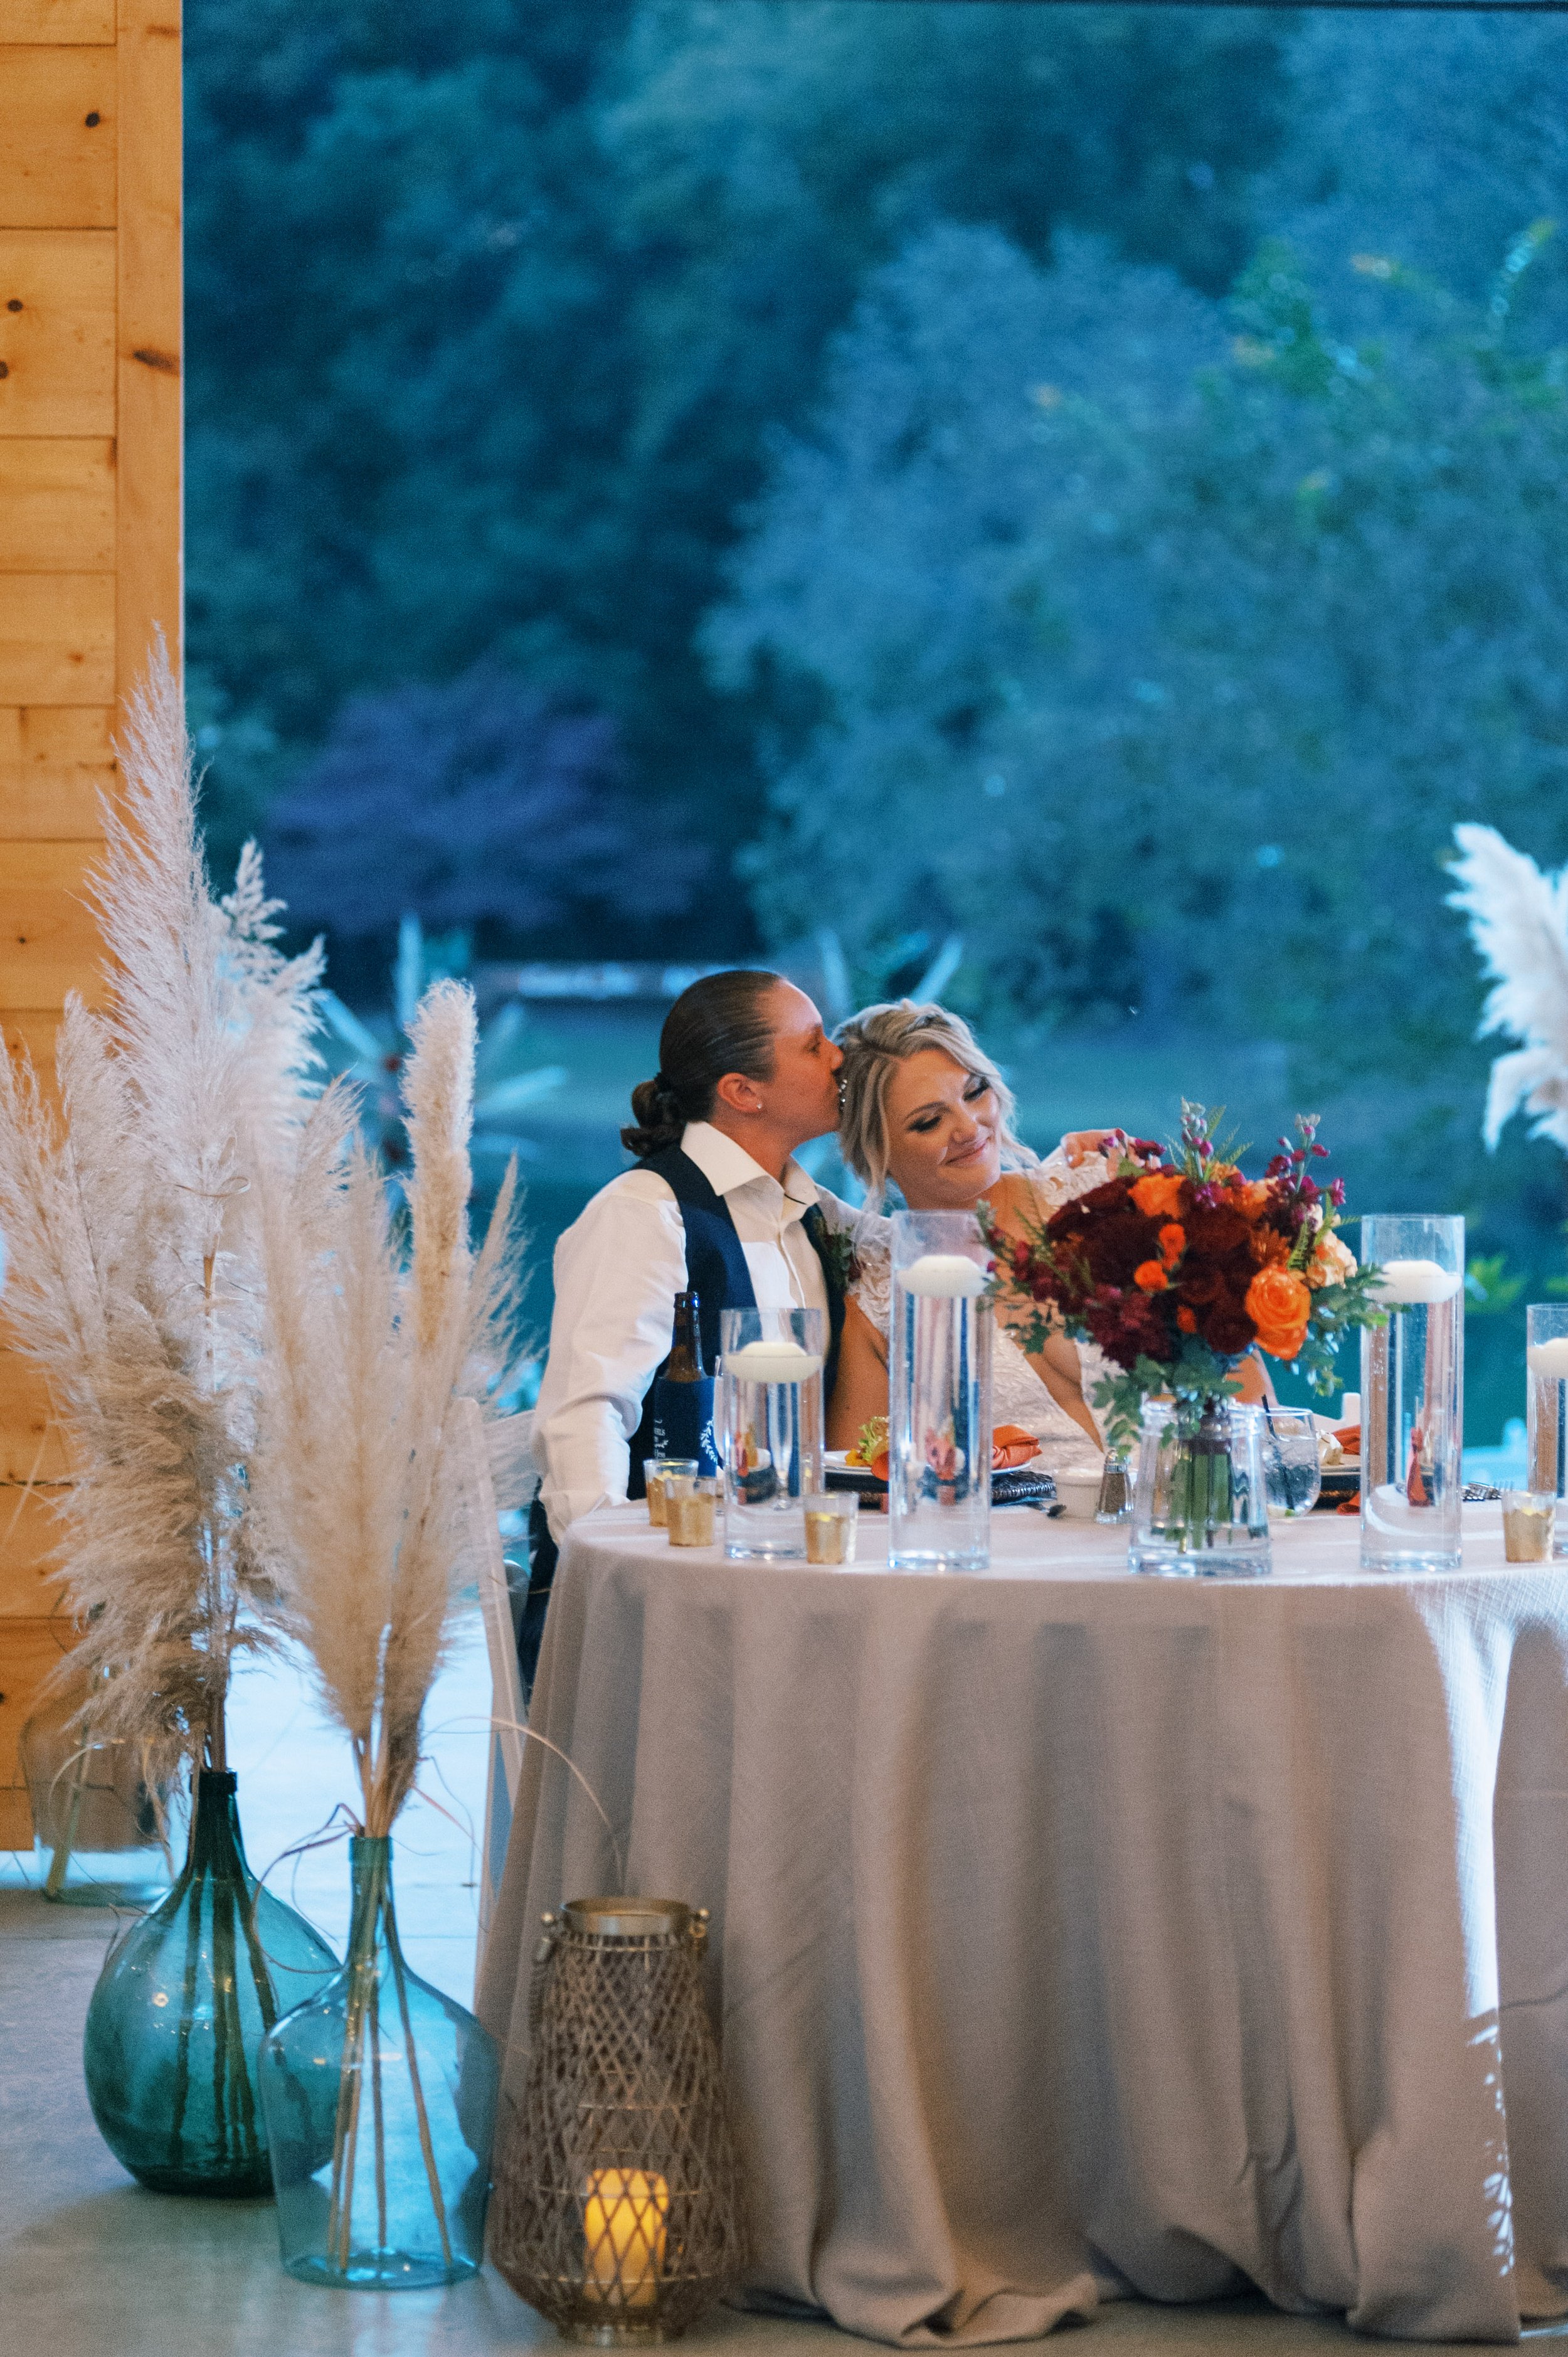 Brides at Sweetheart Table Walnut Hill NC Wedding Venue Fancy This Photography